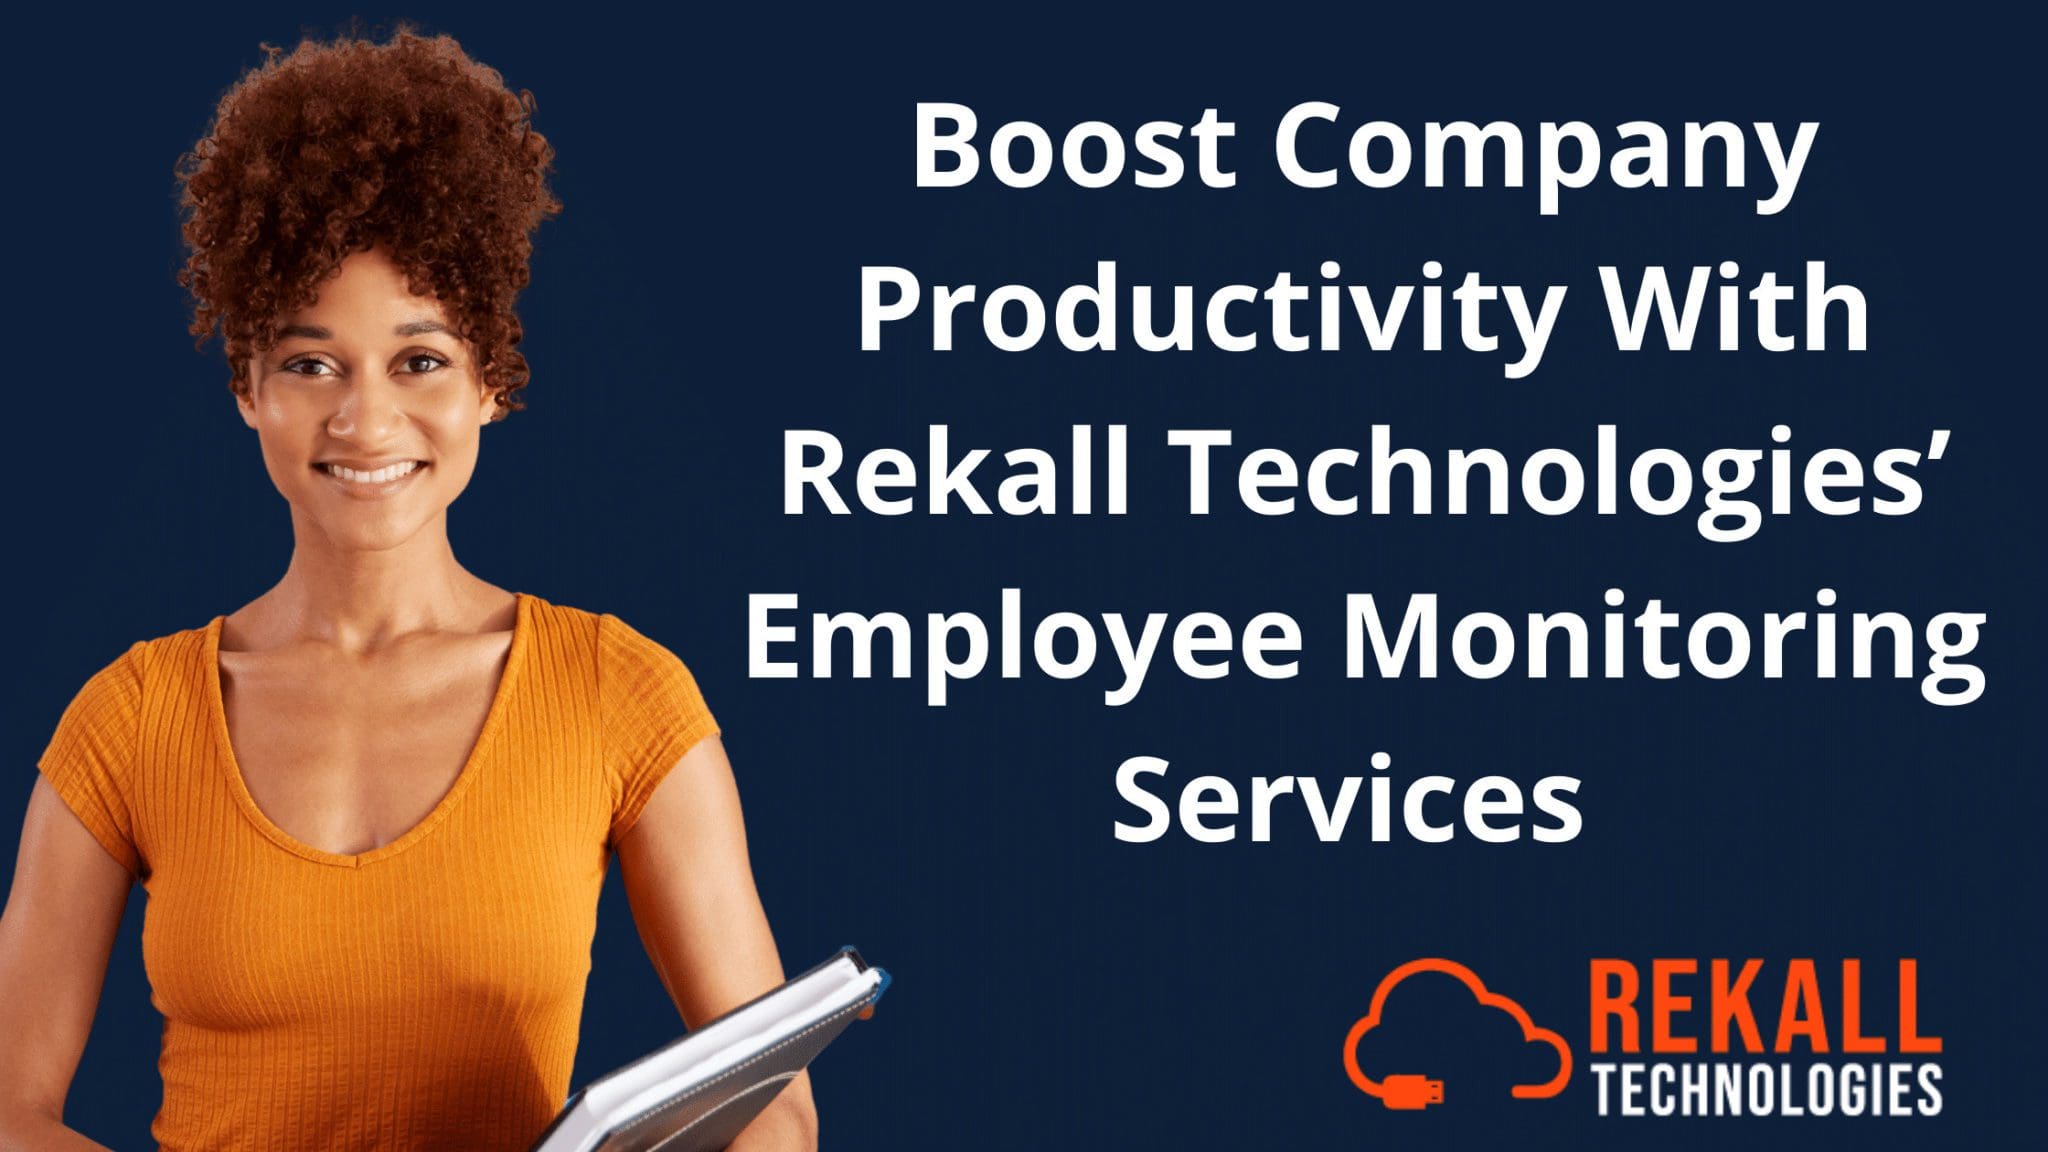 Boost Company Productivity With Rekall Technologies’ Employee Monitoring Services 